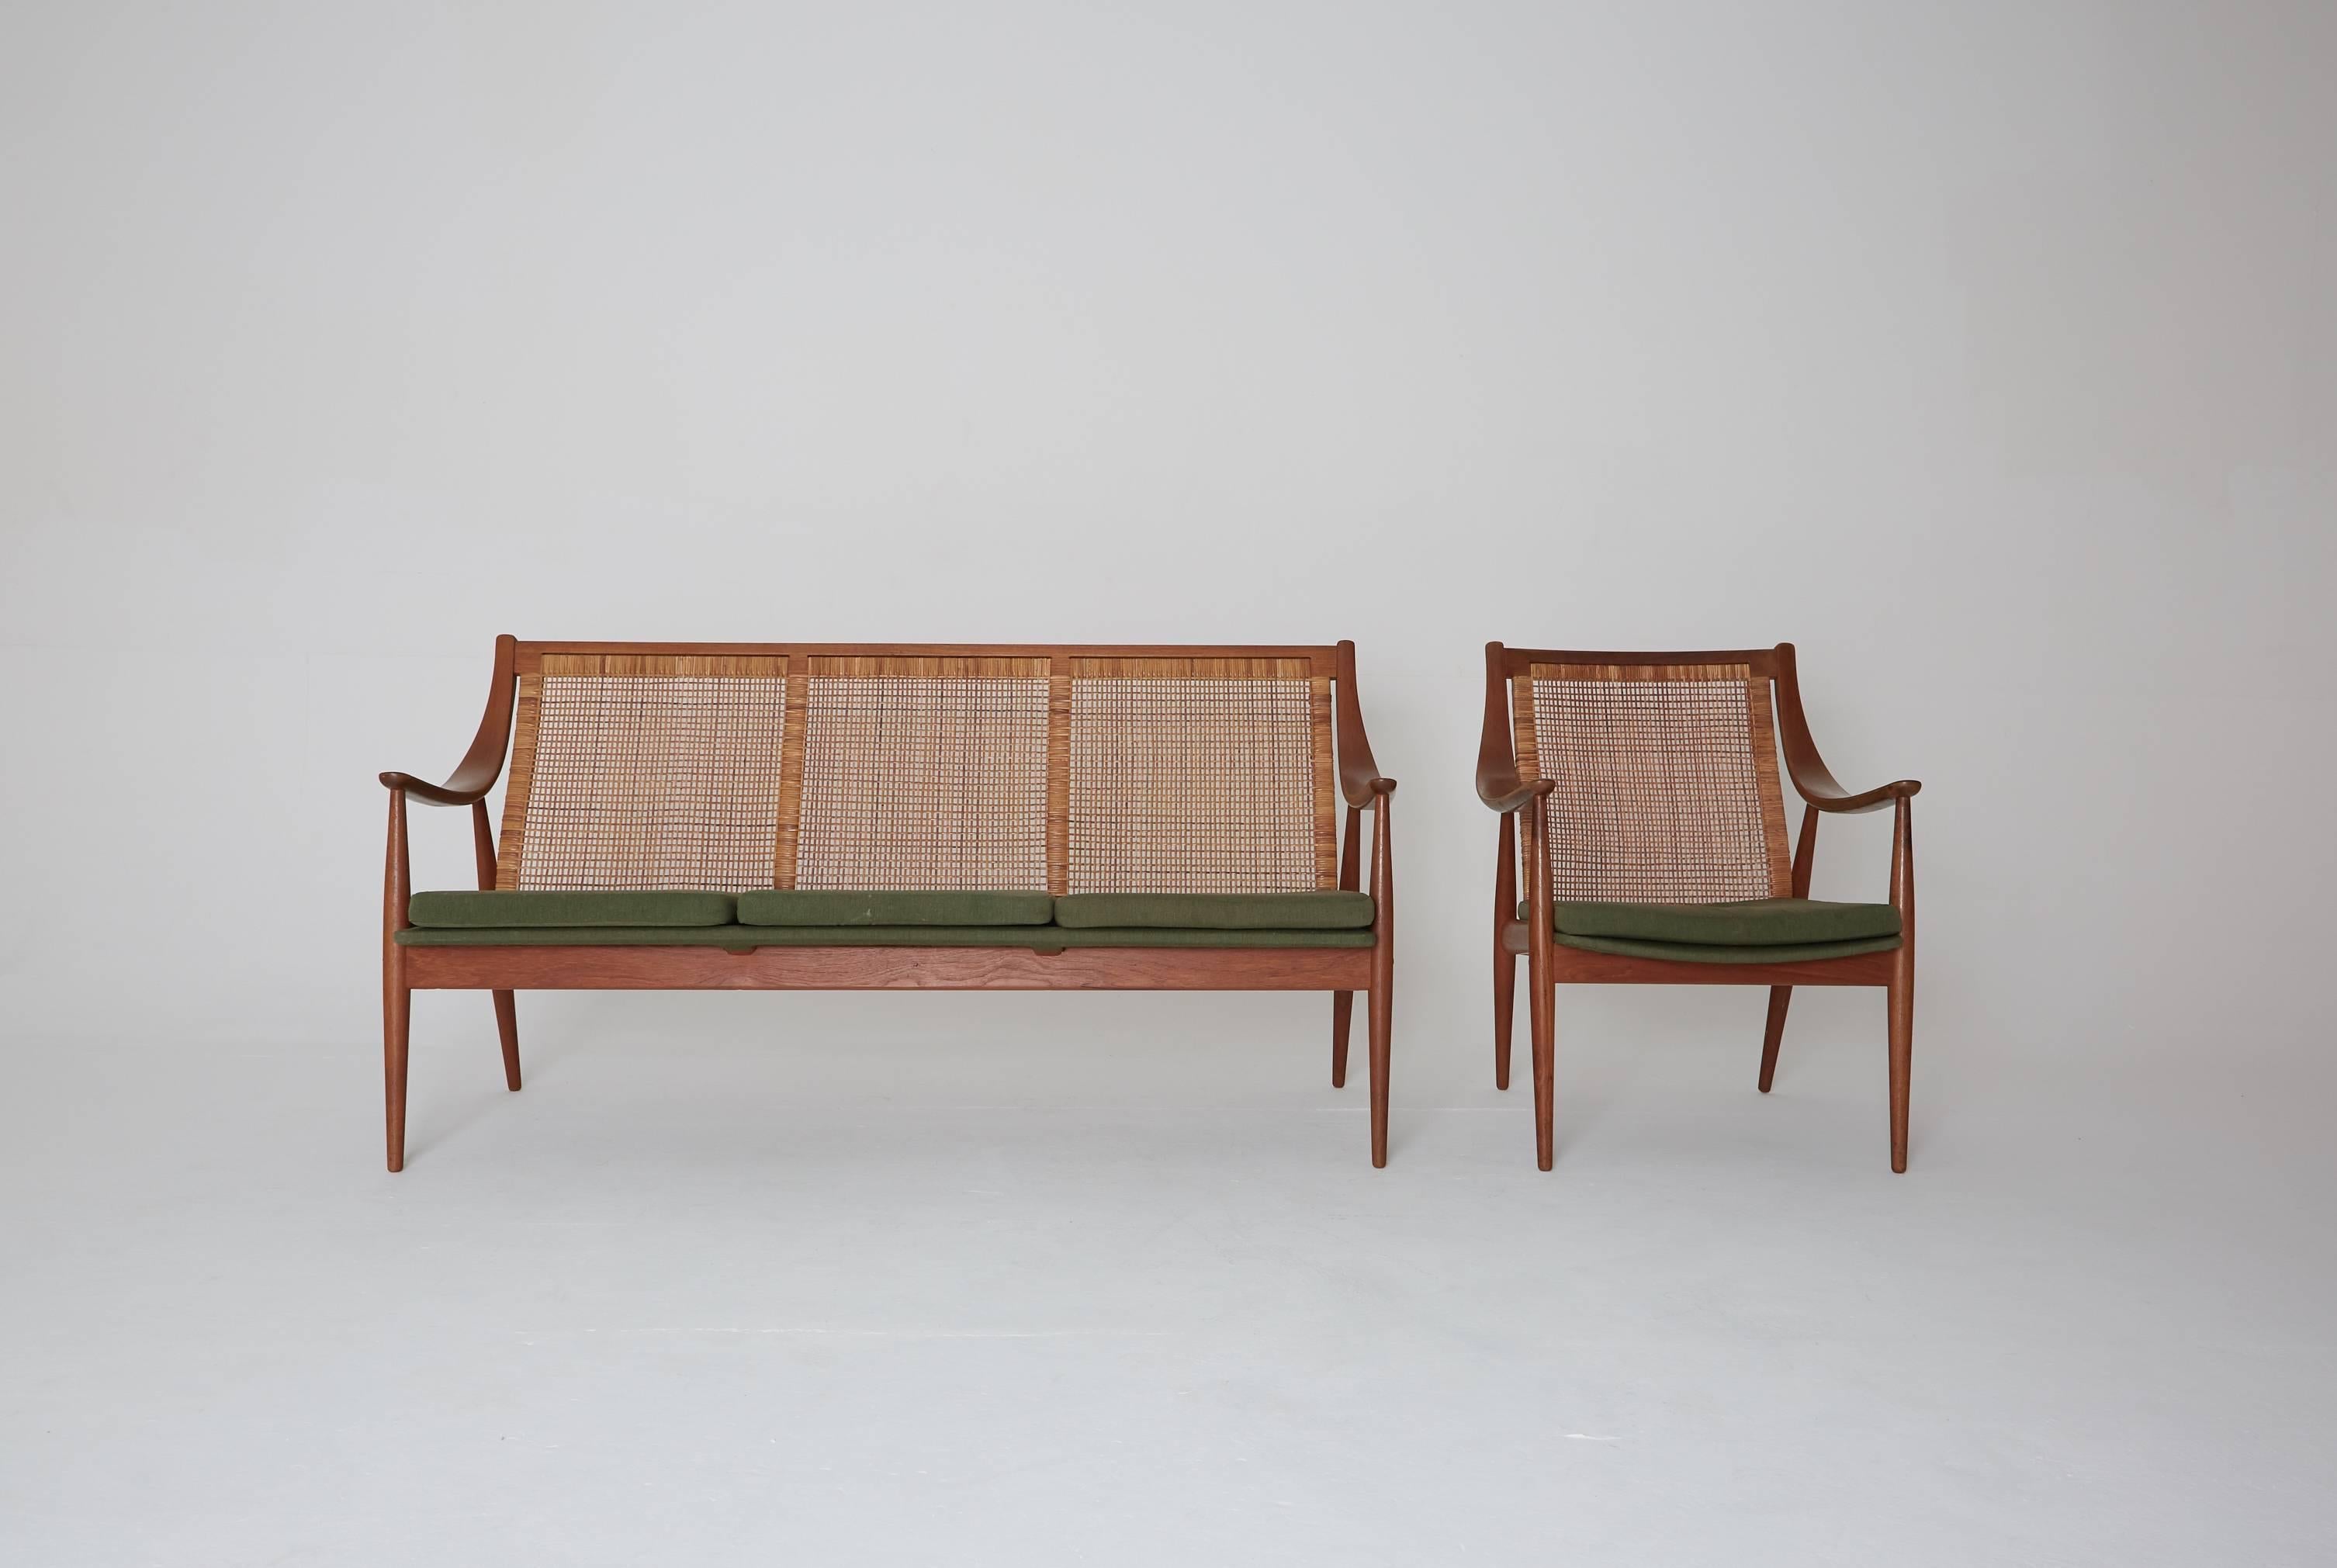 A rare Peter Hvidt & Orla Mølgaard-Nielsen FD 146 sofa and chair, Denmark, 1950s with original green fabric seats.